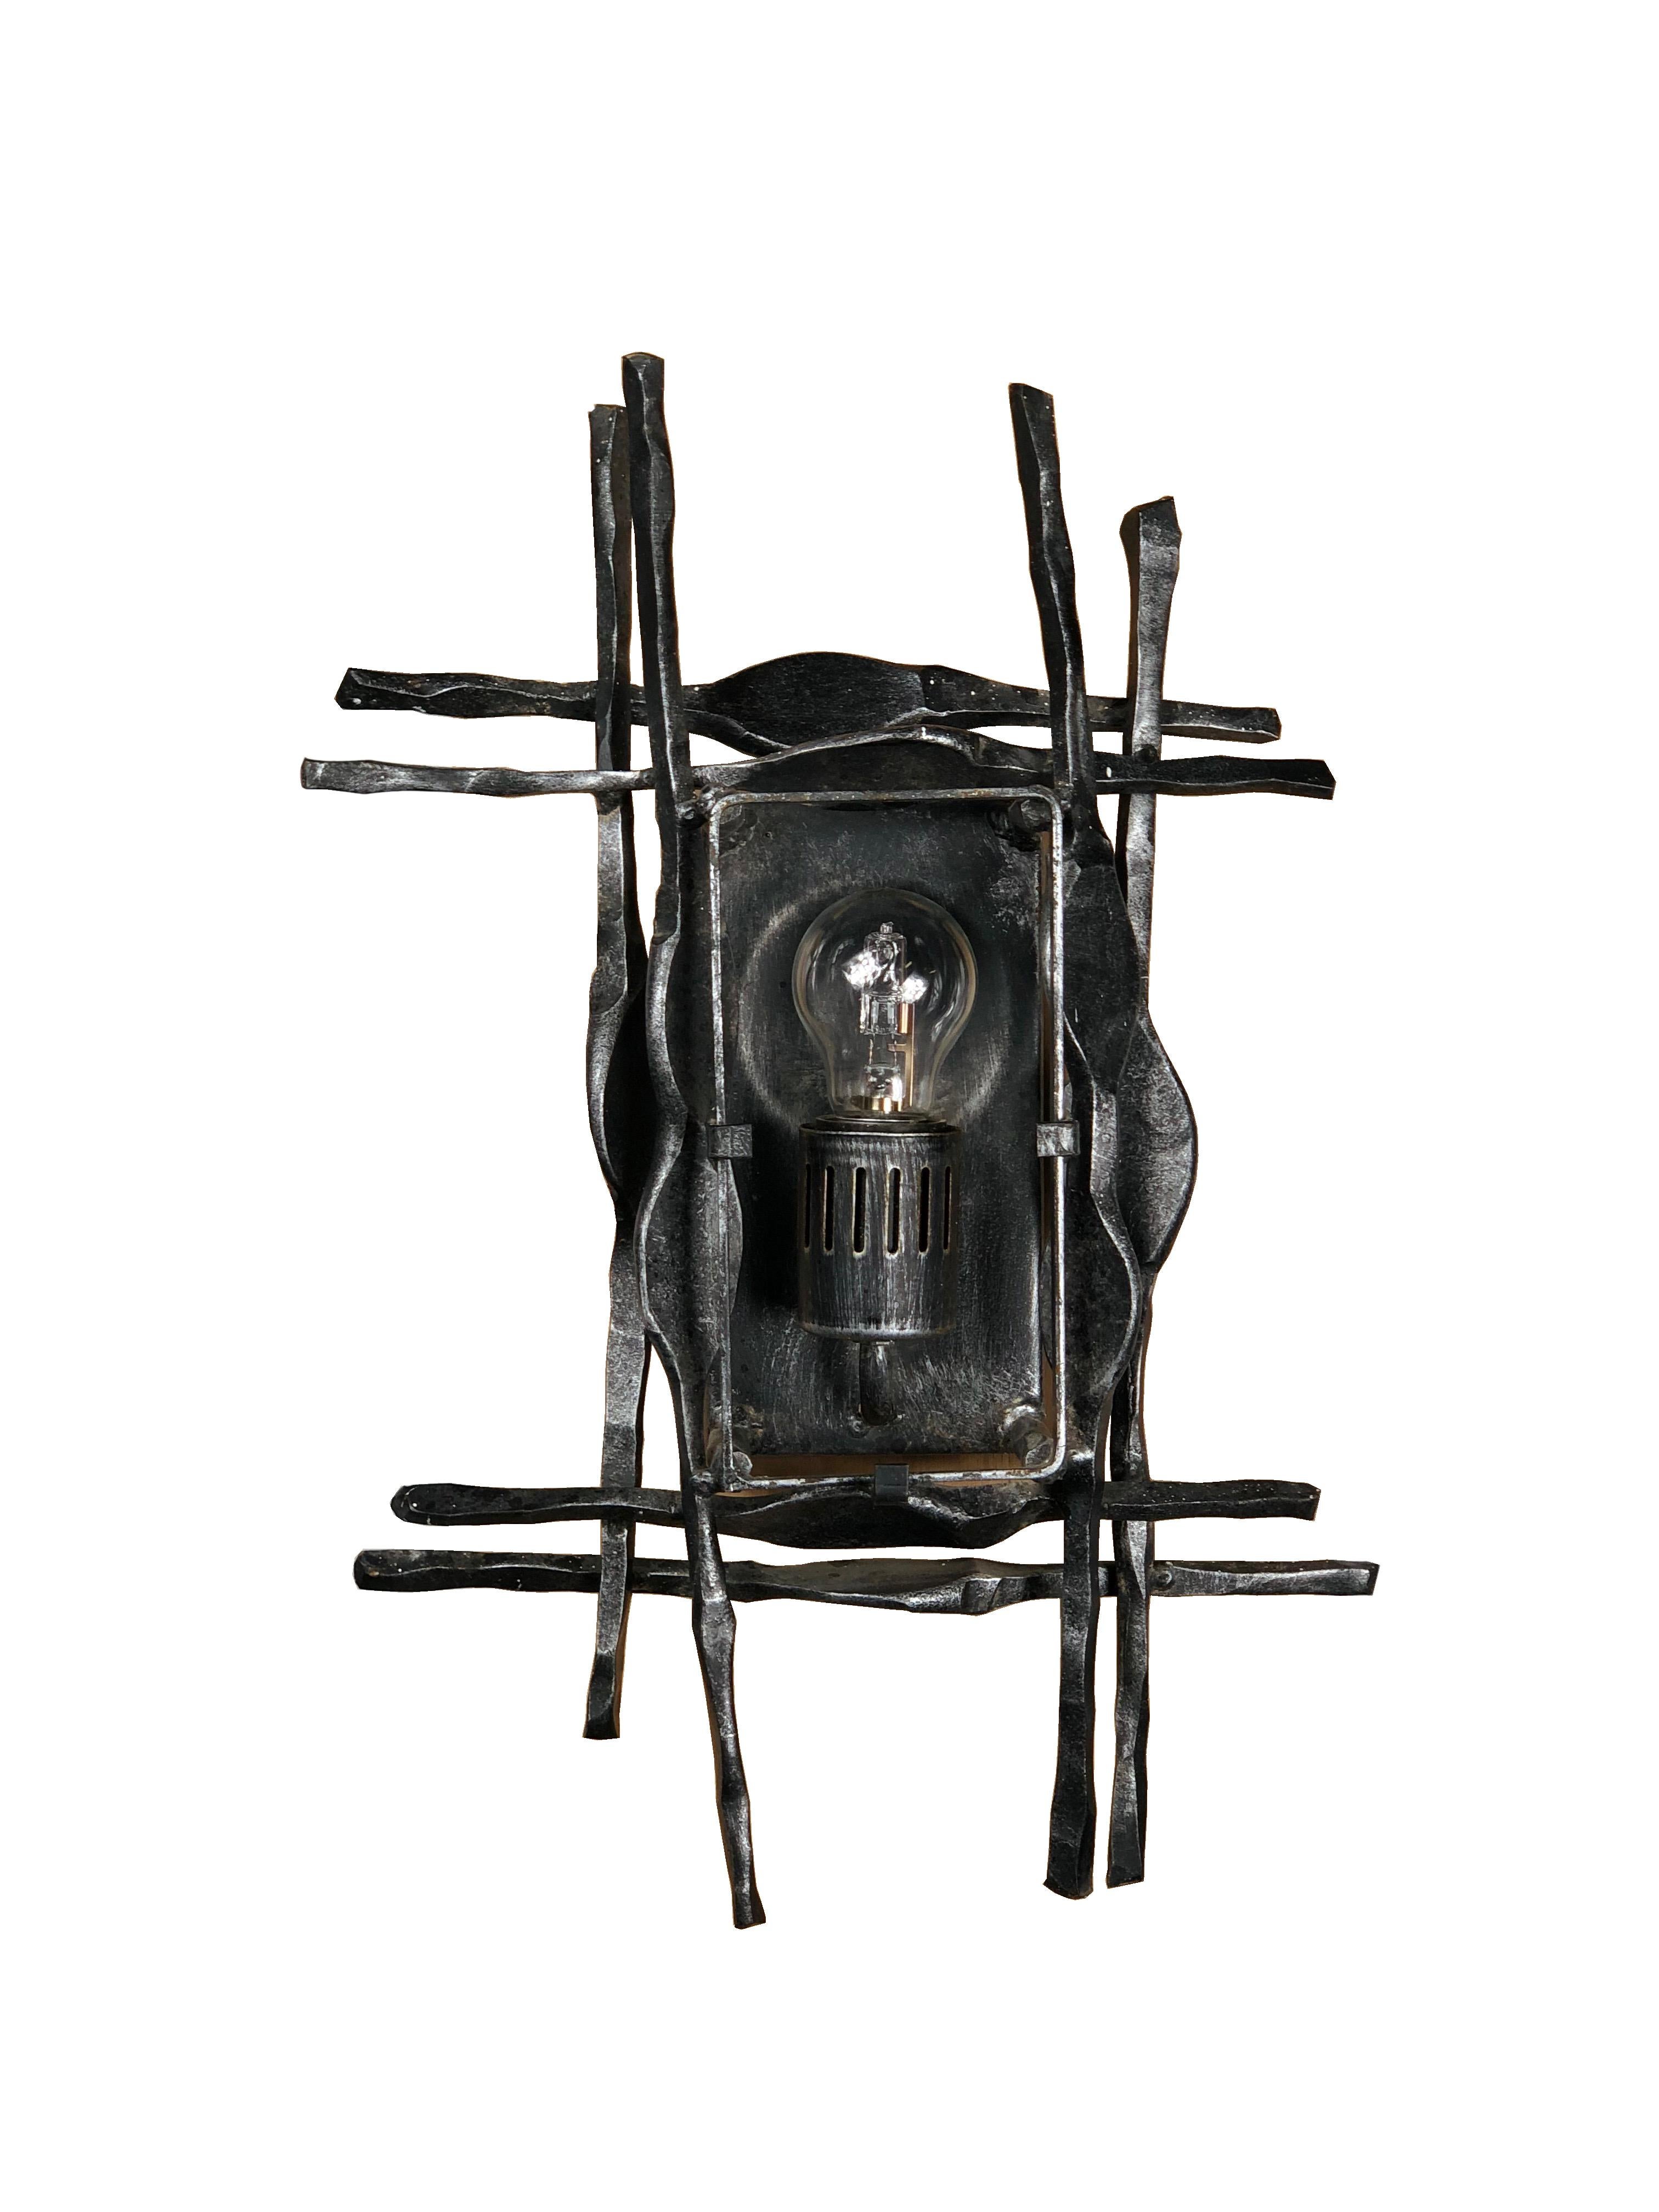 Wall sconce from Swedish design company A & E Design, circa 1970, in the Brutalist style. The hand-wrought iron surround has a good patination and is set off by the Mazzega Murano glass with clear and amber tones. An impressive modernist wall light